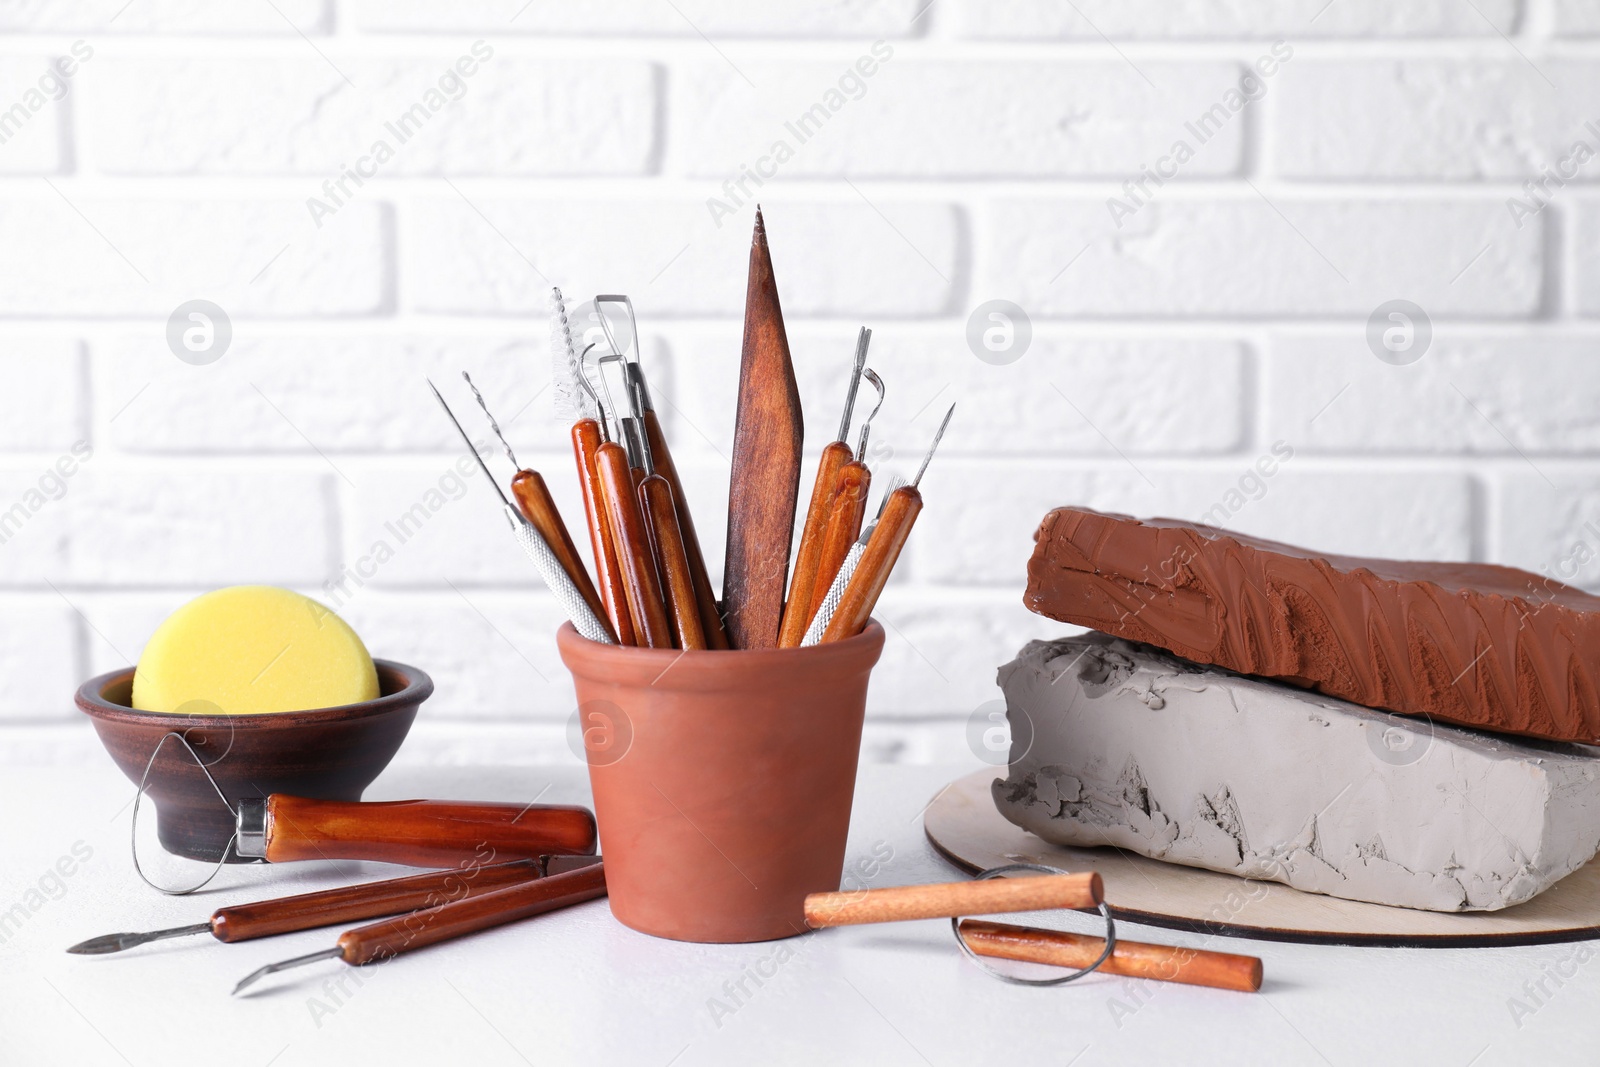 Photo of Clay and set of crafting tools on white textured table against brick wall